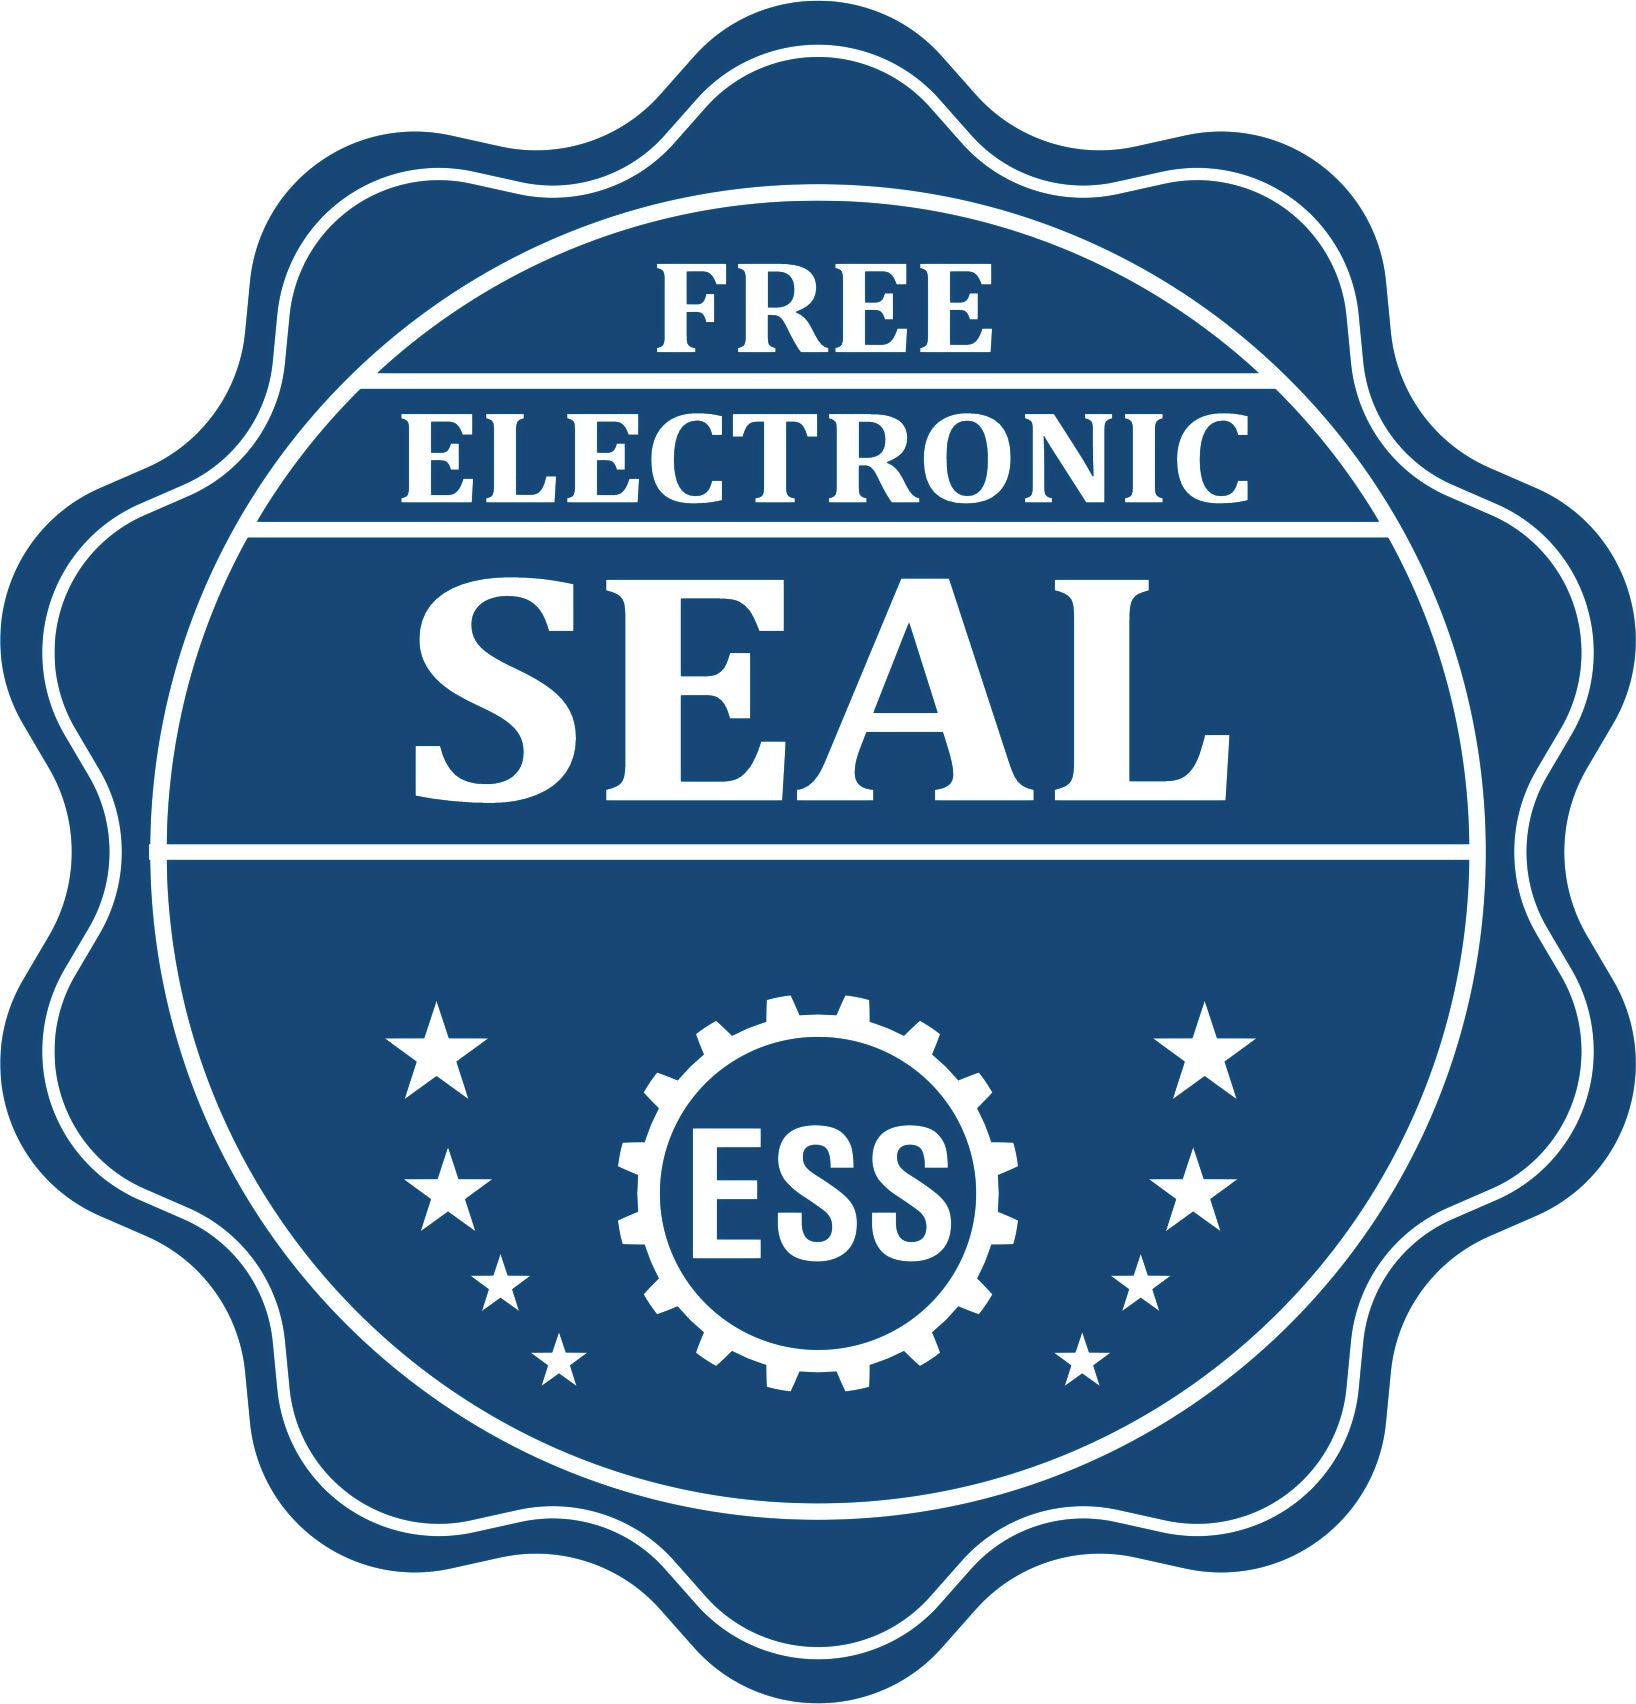 A badge showing a free electronic seal for the Hybrid Washington Engineer Seal with stars and the ESS gear on the emblem.